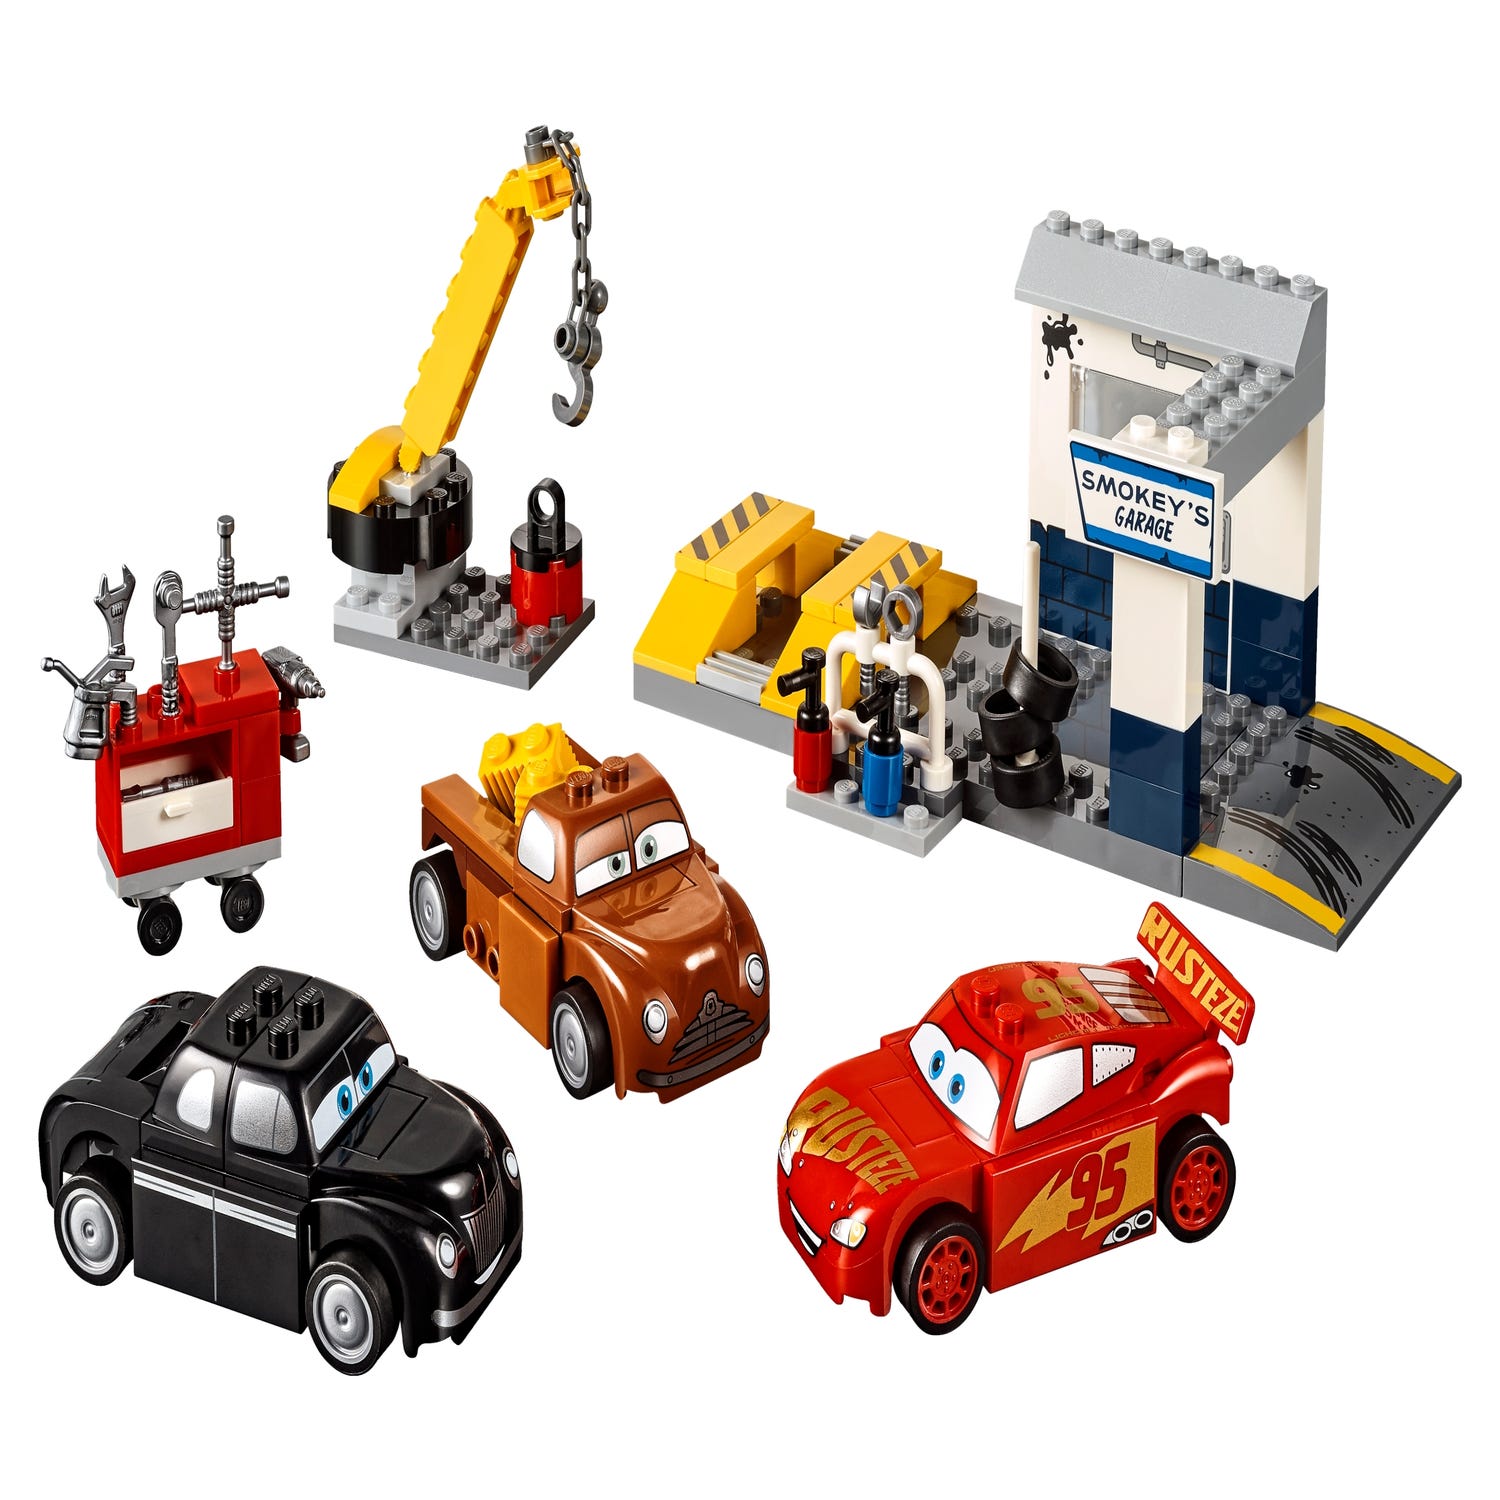 Smokey's Garage 10743 | Buy online the Official LEGO® Shop US